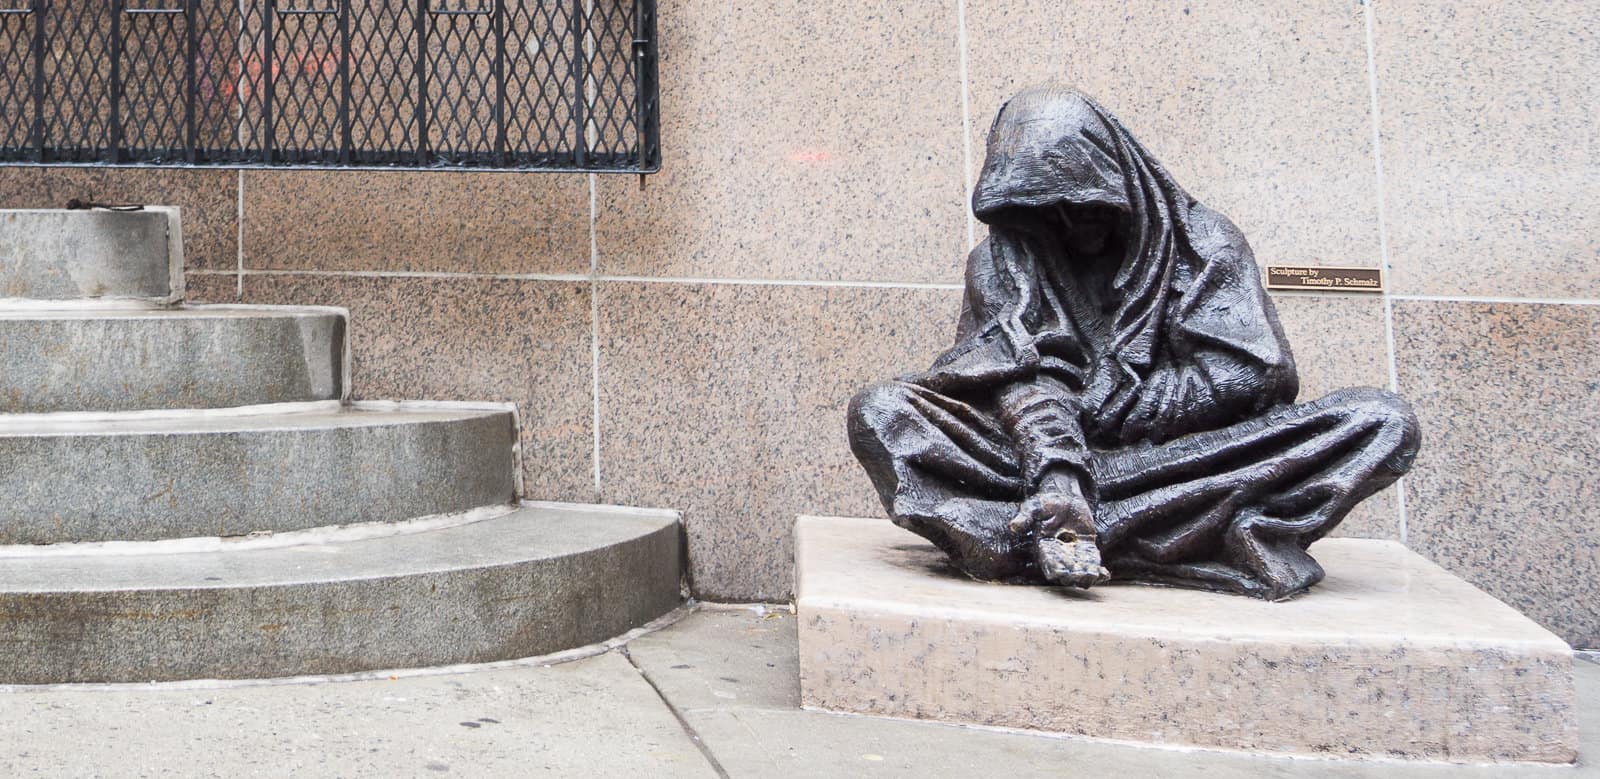 A bronze outdoor sculpture of a begging woman with her hand extended while wrapped in a blanket.